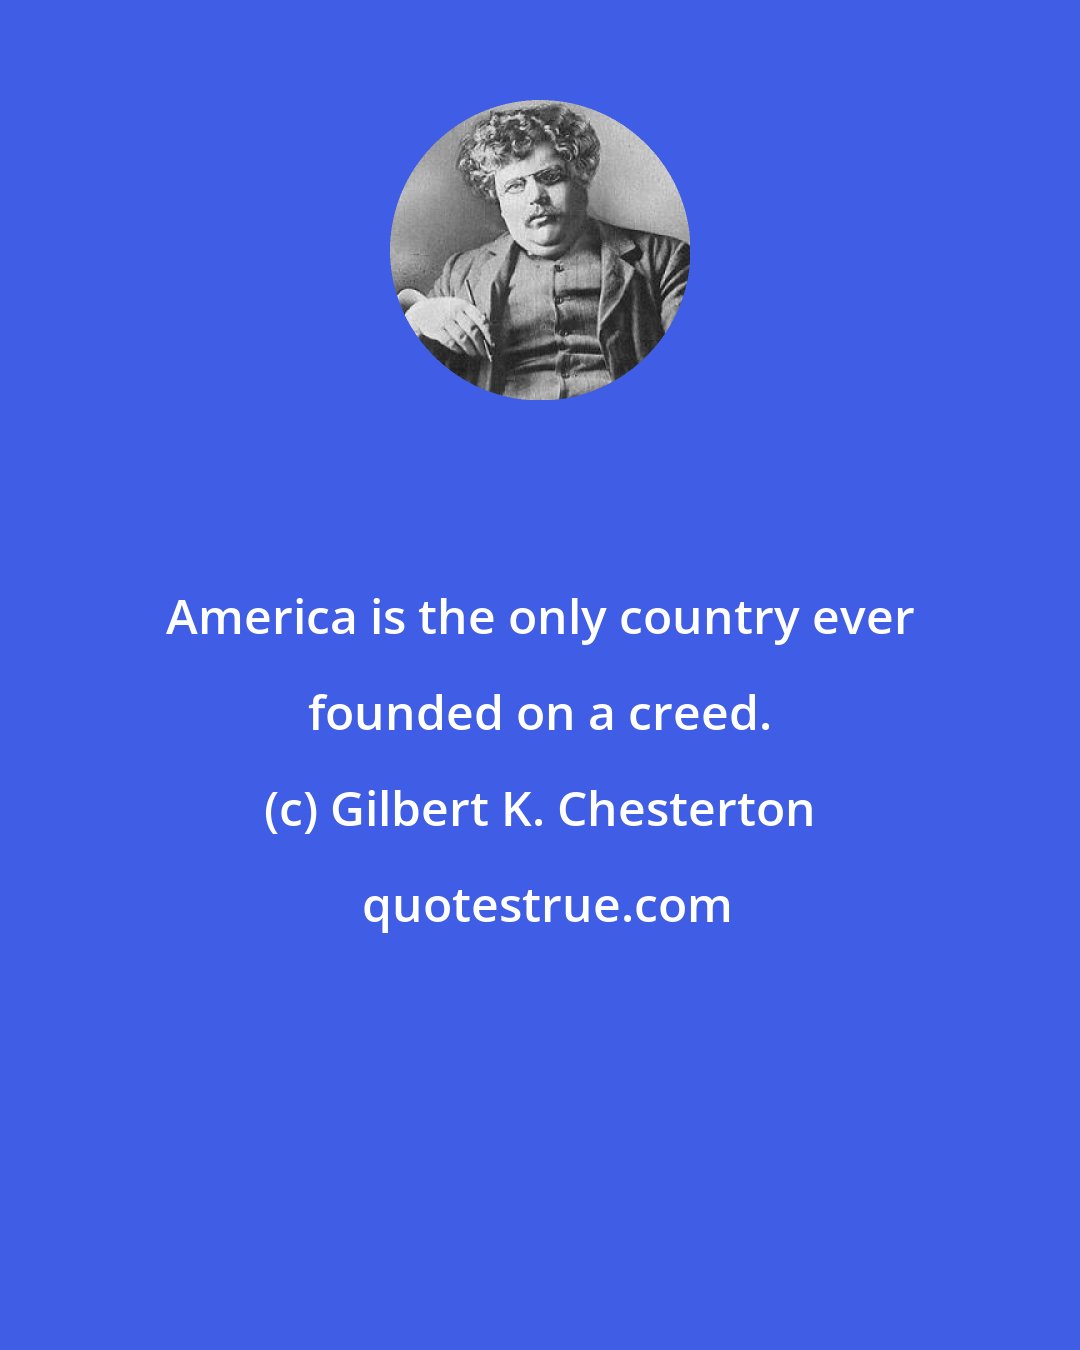 Gilbert K. Chesterton: America is the only country ever founded on a creed.